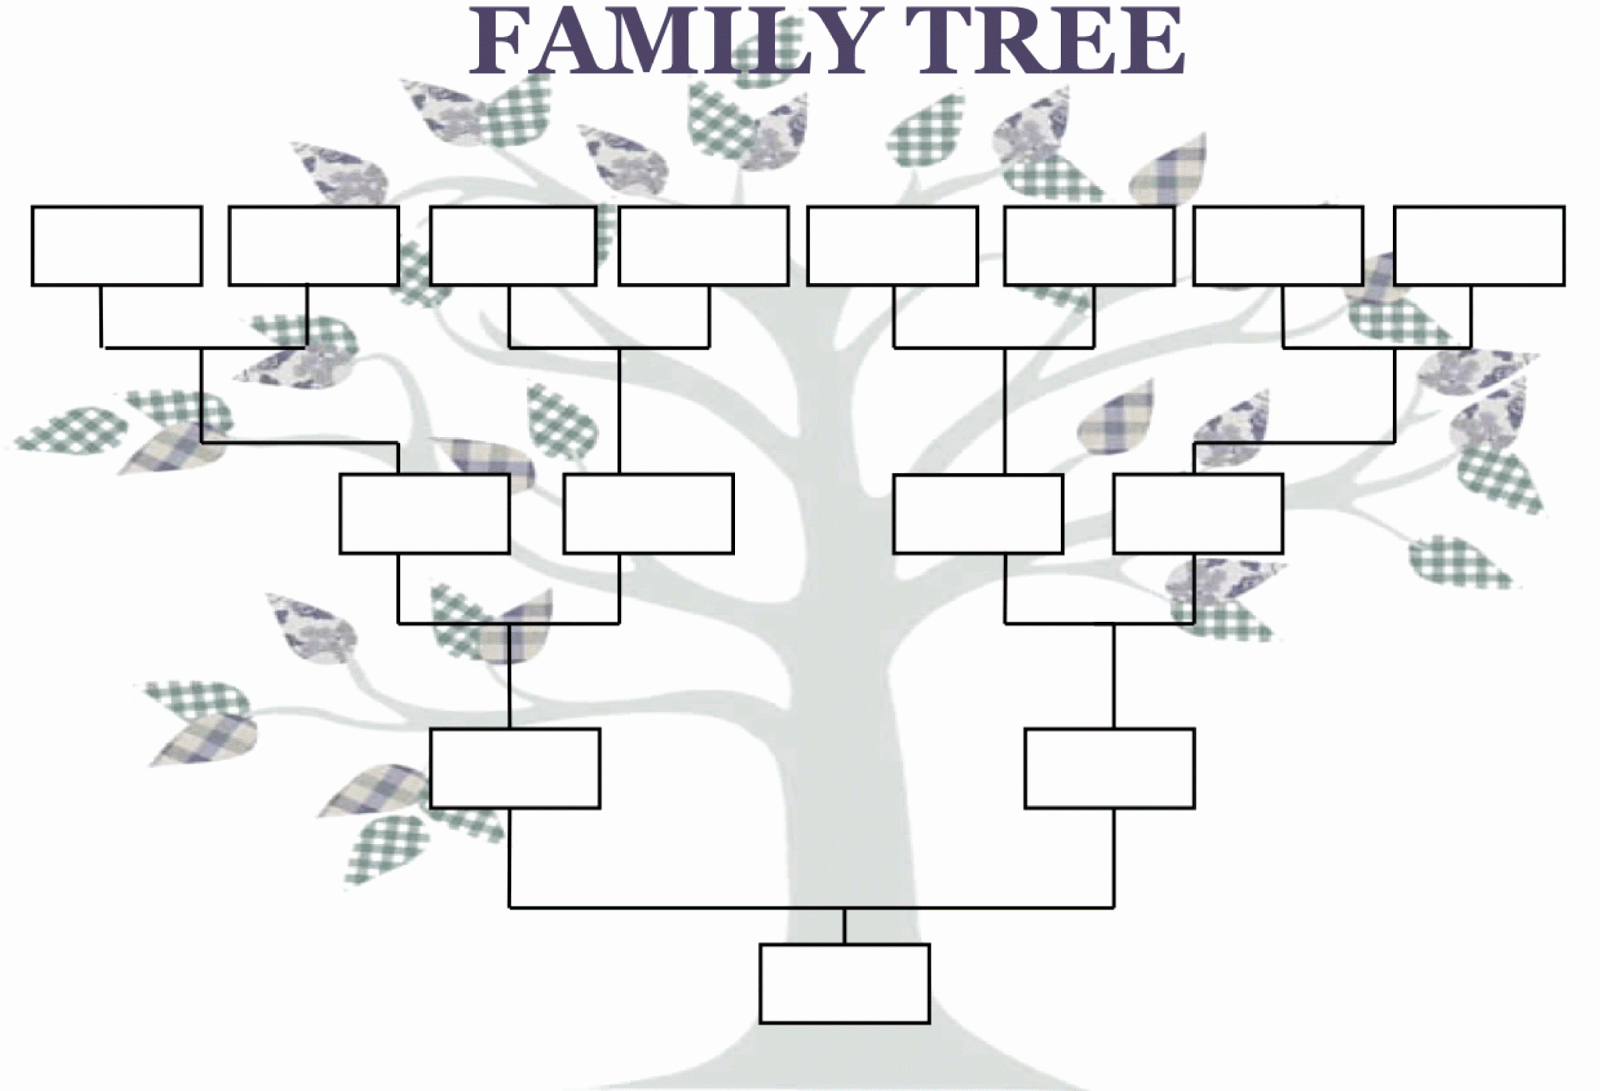 Family Tree Template 5 Generations Awesome Family Tree Template